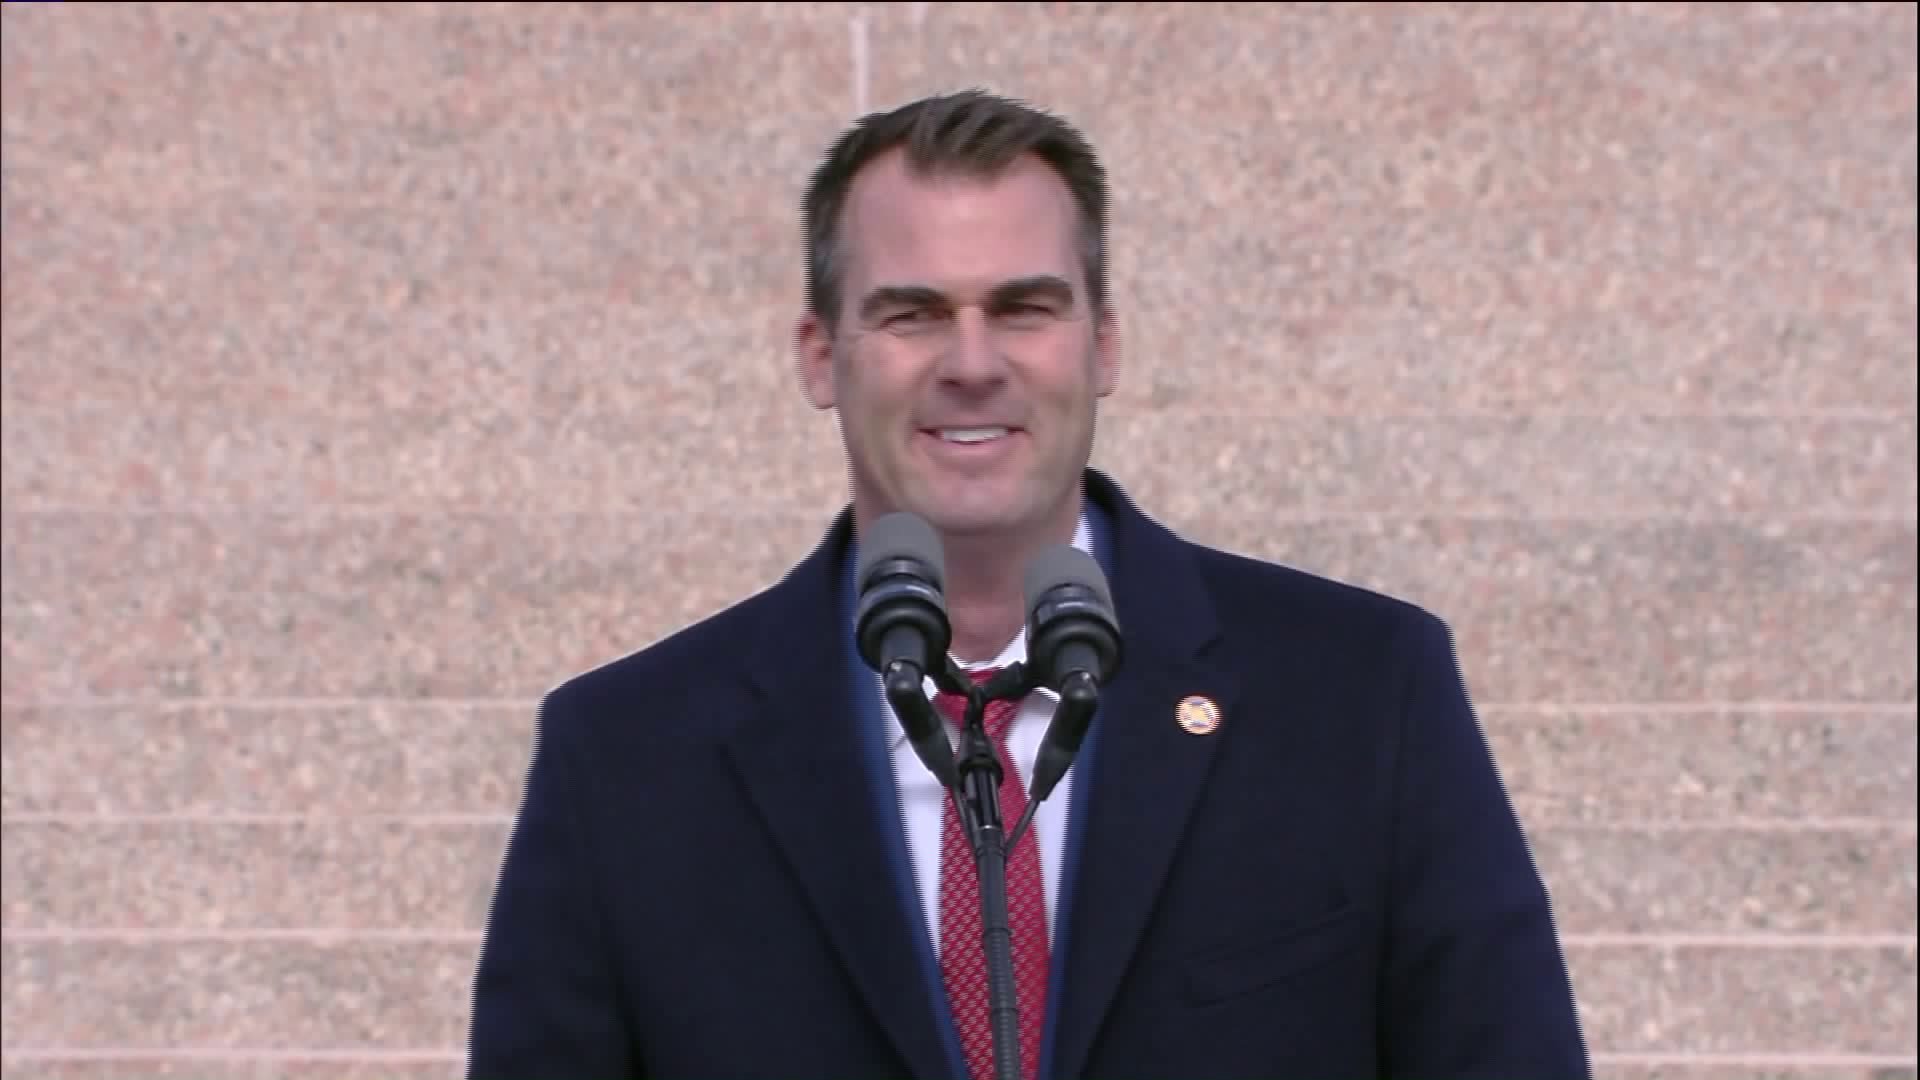 Oklahoma’s governor adds 2 more men to cabinet